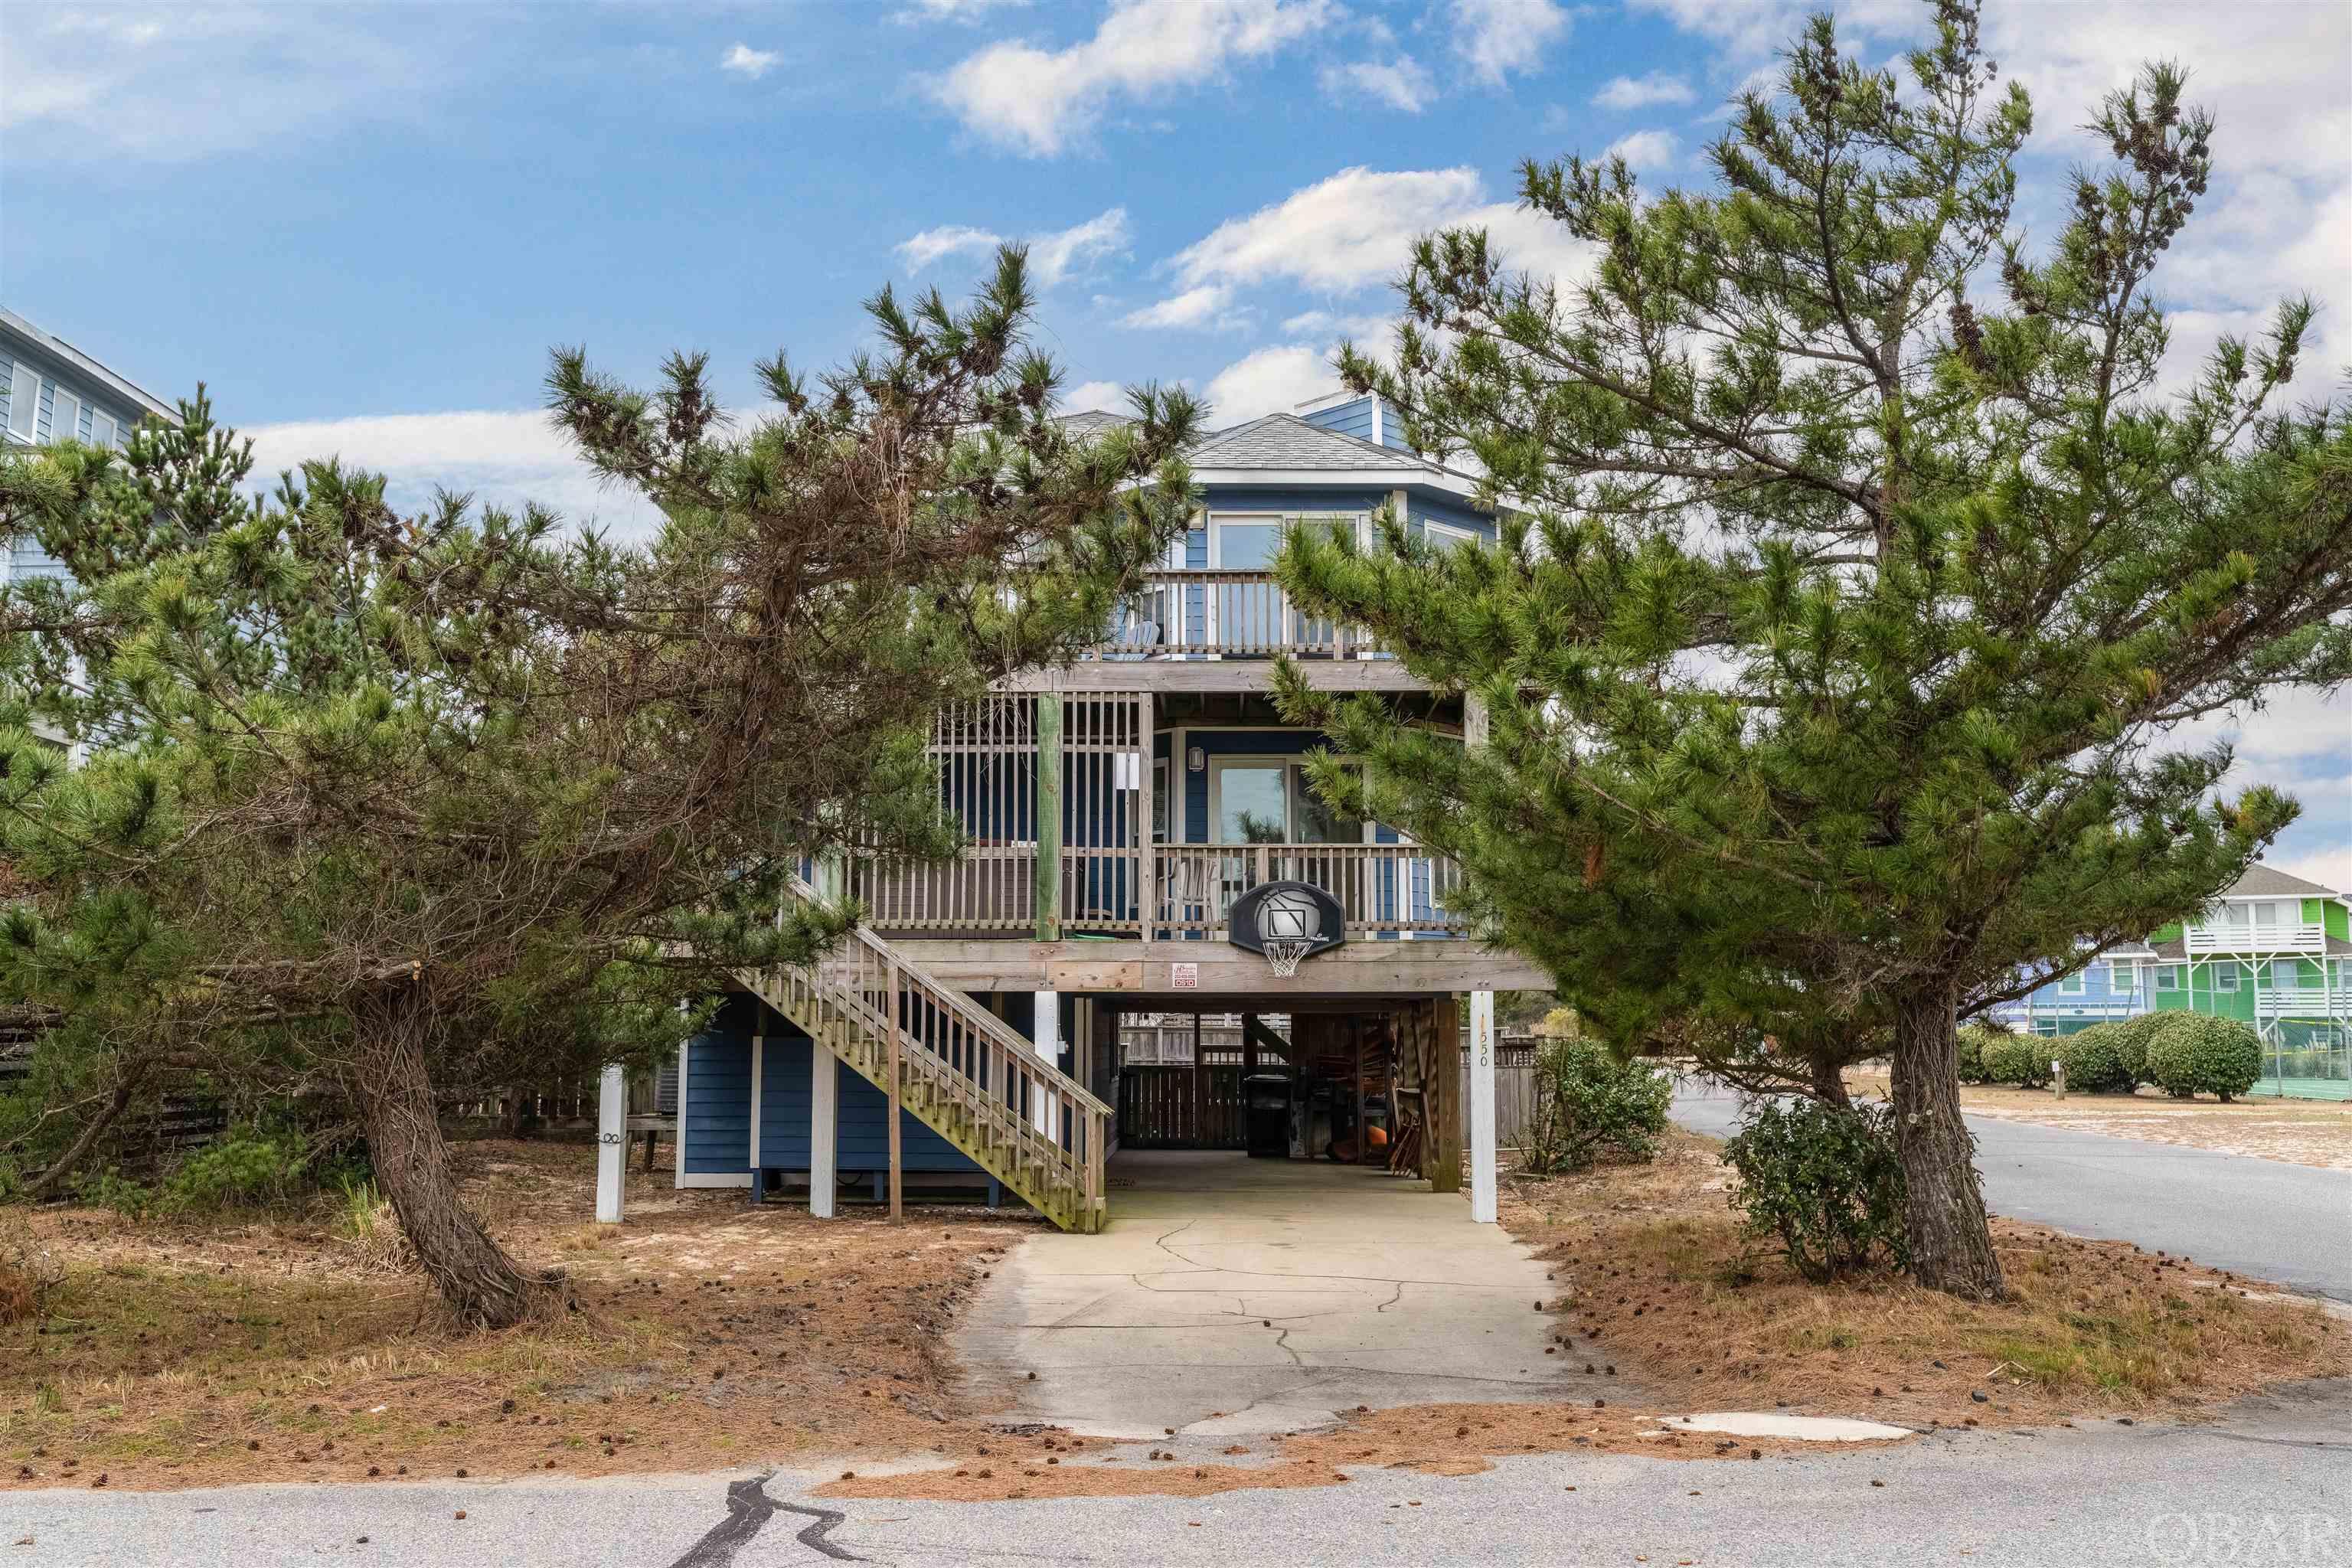 This corner homesite, Semi Oceanfront house is in the perfect location, with direct beach access just steps away.  Private tennis courts available on open space next door.  Home has a ground floor rec room with pool table.  Mid level has 3 bedrooms, with a king master bedroom that has access to the covered deck and hot tub.  The top level has a cozy and comfortable great room area with wood burning fireplace.  The kitchen area has been enhanced with new upgrades.  You will also find an additional queen bedroom.  There is a slight ocean view from the top sundeck.  The ocean surf is beckoning or relax and enjoy your own private pool.  Plenty of choices with the numerous beach activities available when your this close to the beach.